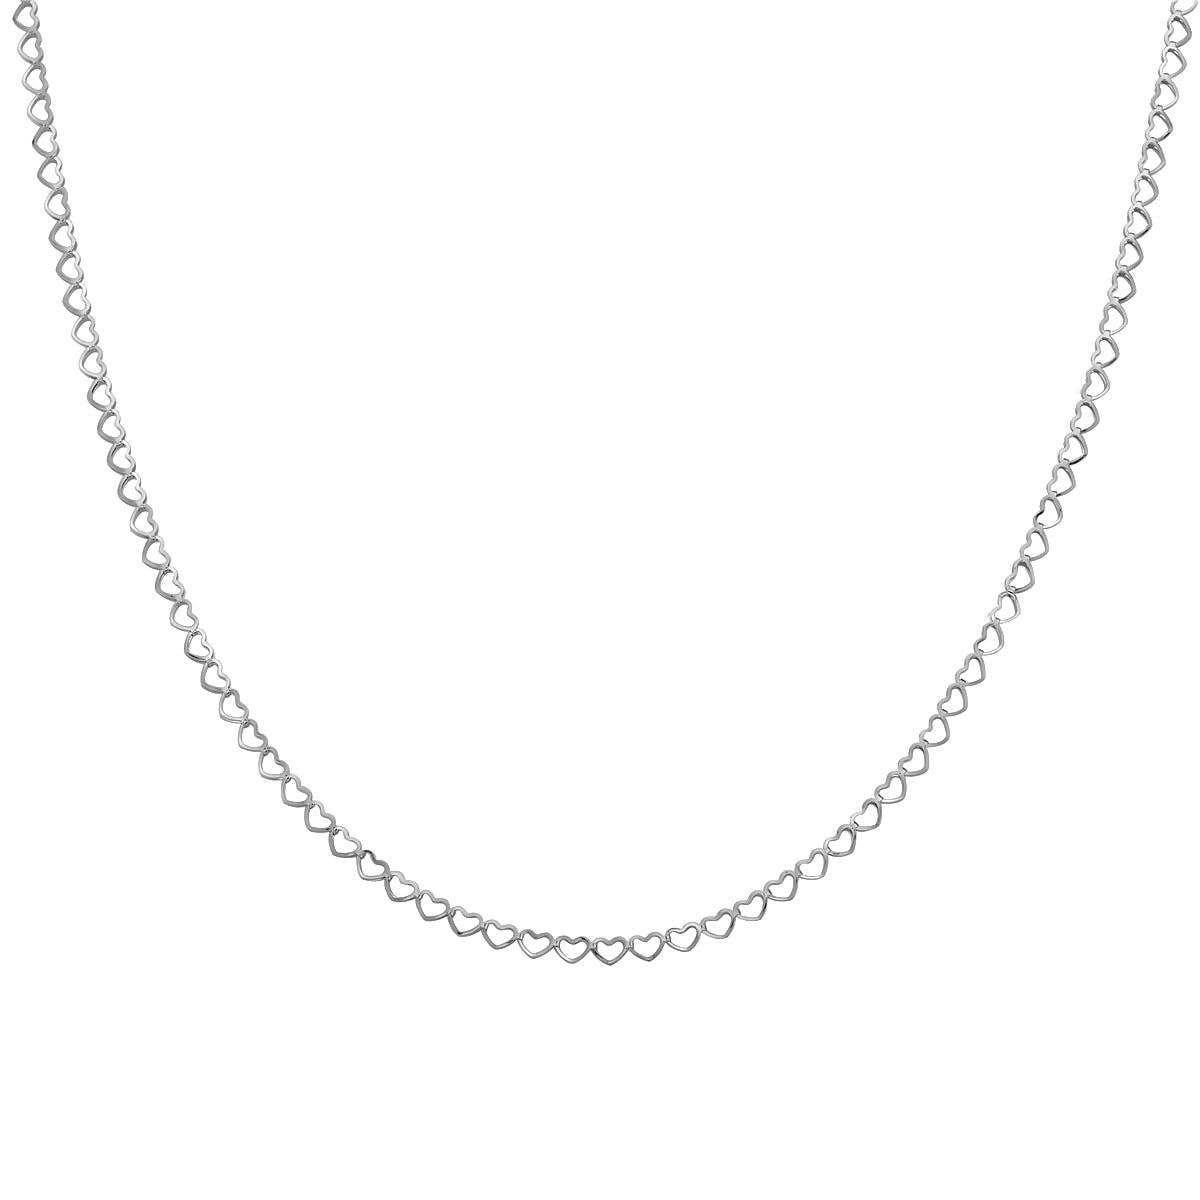 14K Gold 2.5MM Open Heart Link Chain Necklace: Yellow Gold / 17 Inches / 2.5MM